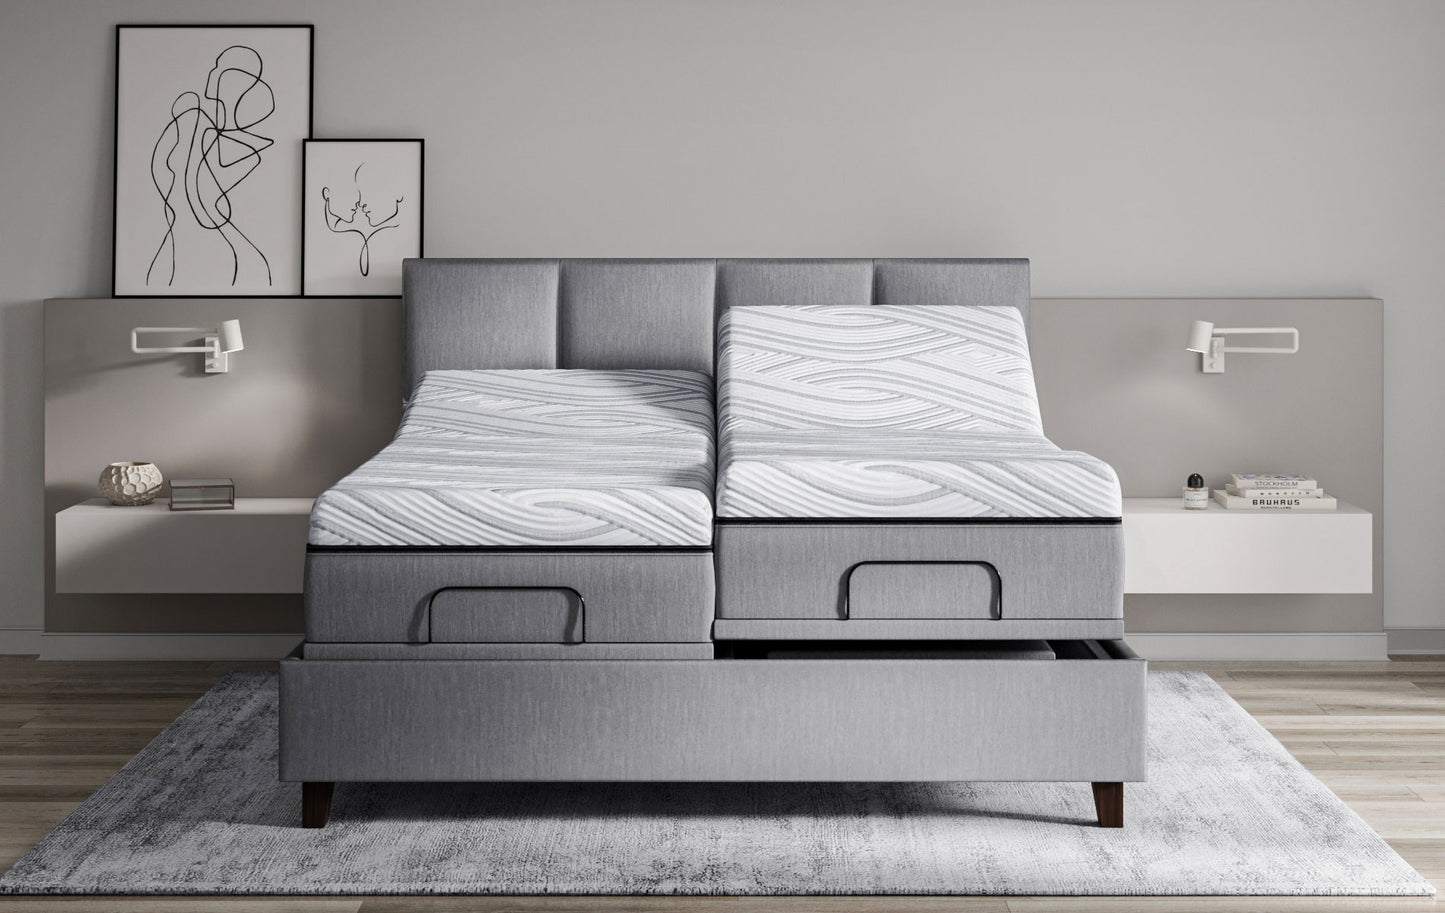 Personal Comfort A8 Smart Bed vs Sleep Number 360 i8 Bed